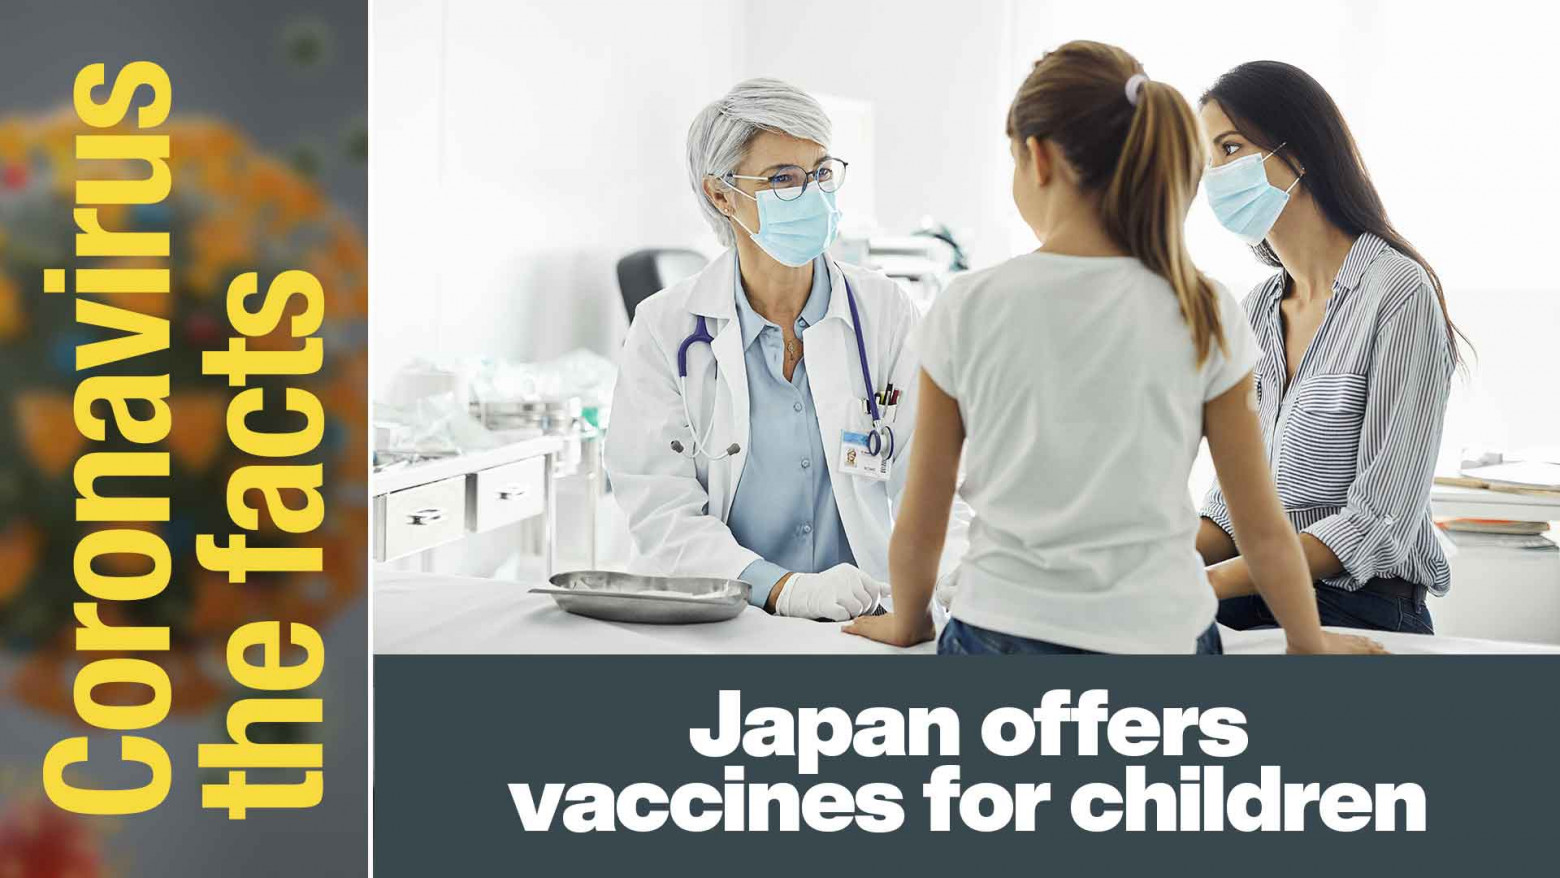 Japan has opened its vaccination program to children aged 5-11